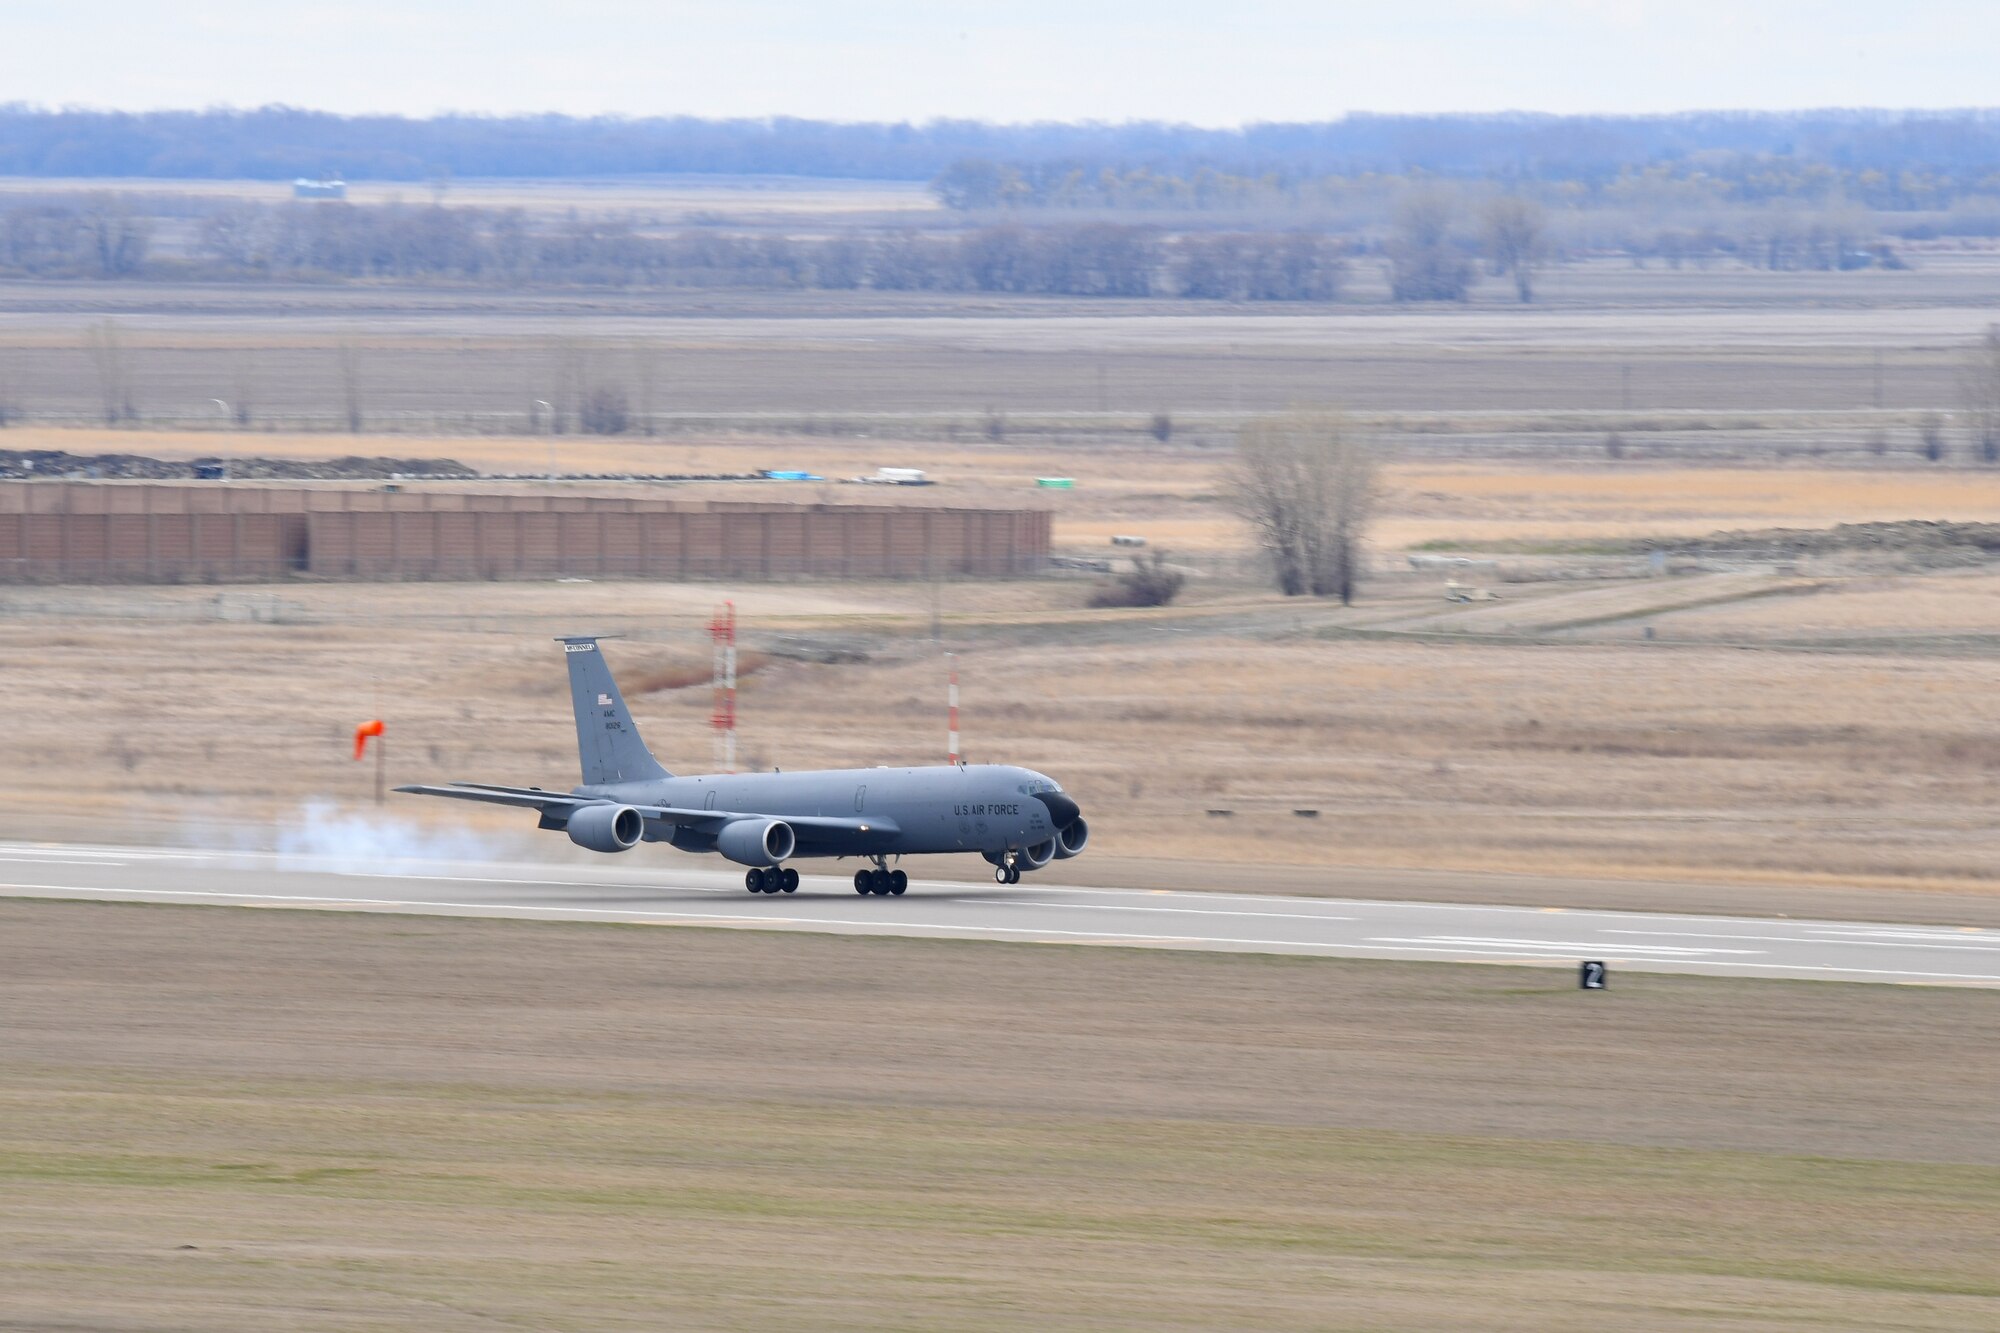 A KC-135 Stratotanker, assigned to the 22nd Air Refueling Wing, lands May 6, 2019, on Grand Forks Air Force Base, North Dakota. This KC-135 was one of several to be housed on Grand Forks AFB temporarily as inclement weather passed near McConnell AFB, Kansas. (U.S. Air Force photo by Senior Airman Elora J. Martinez)